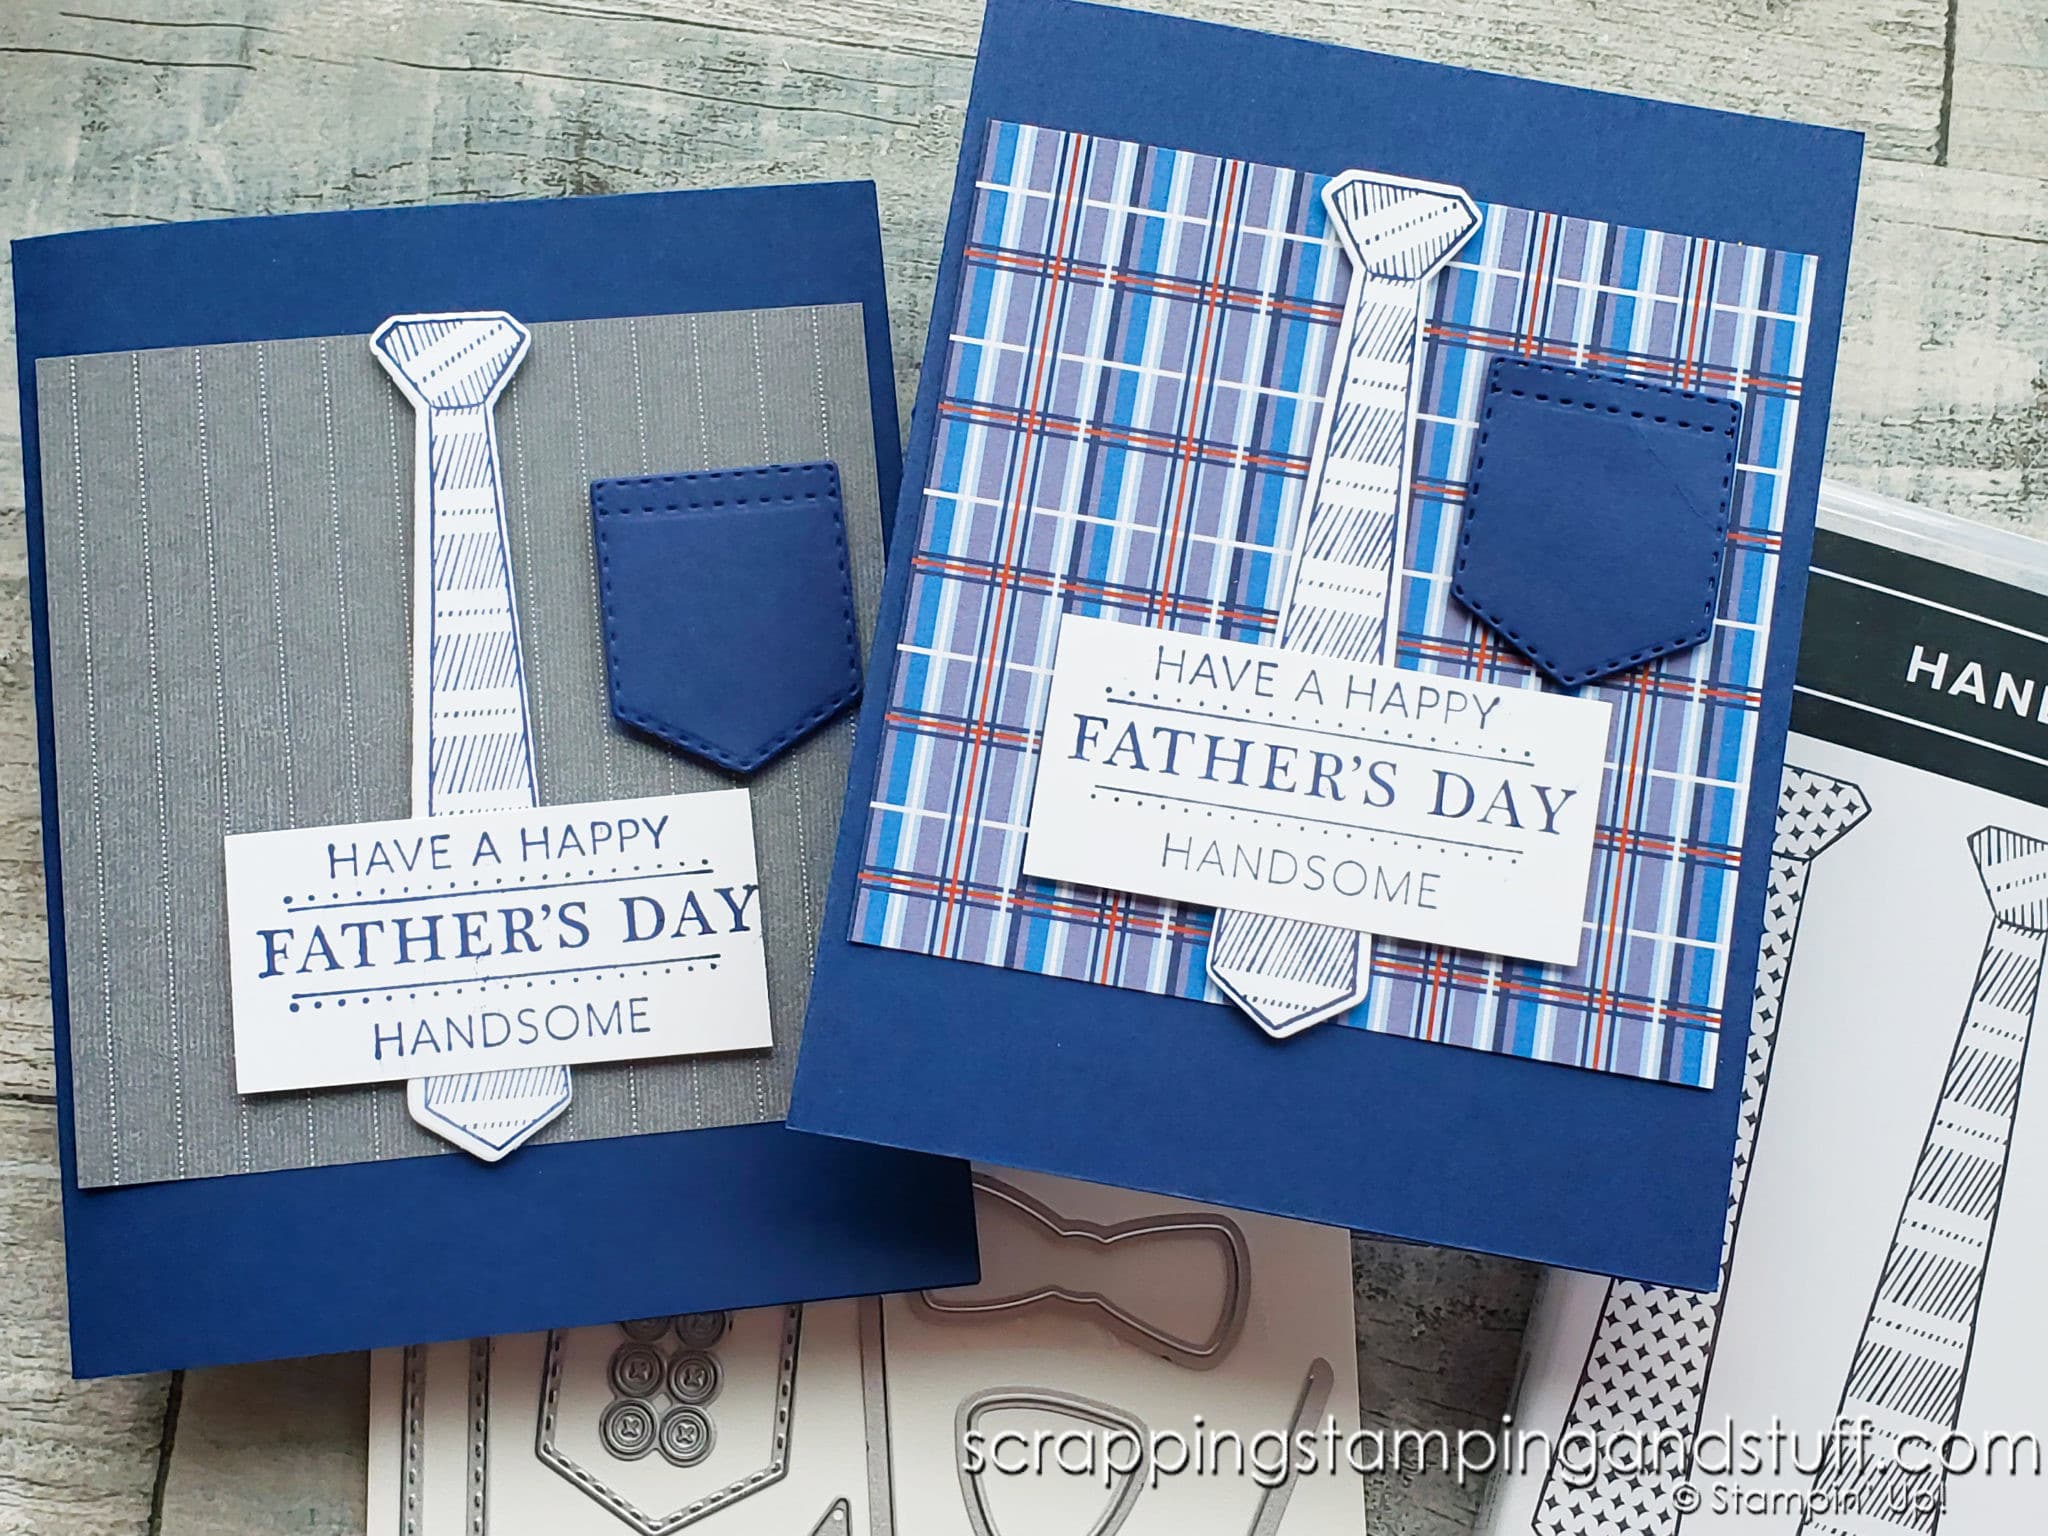 Stampin Up Handsomely Suited Makes The Best Cards For Men!